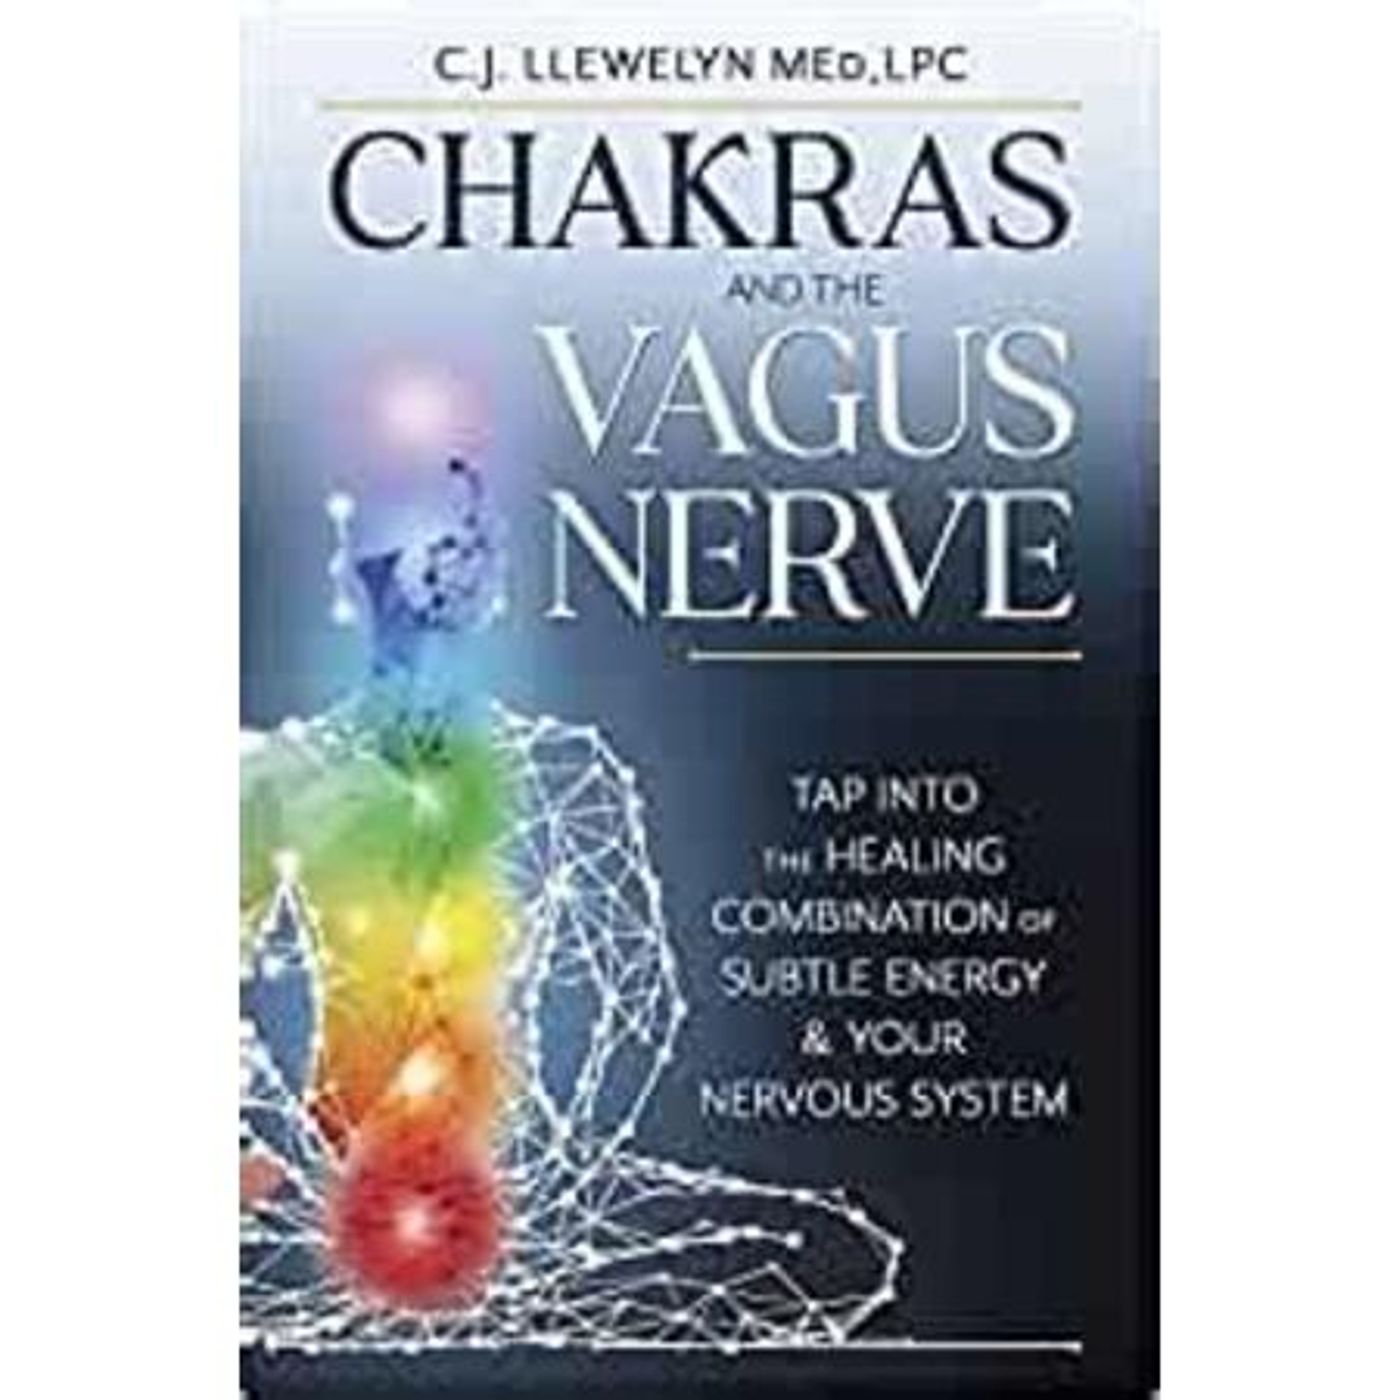 Chakras & the Vagus Nerve with author C.J. Llewelyn MED, LPC